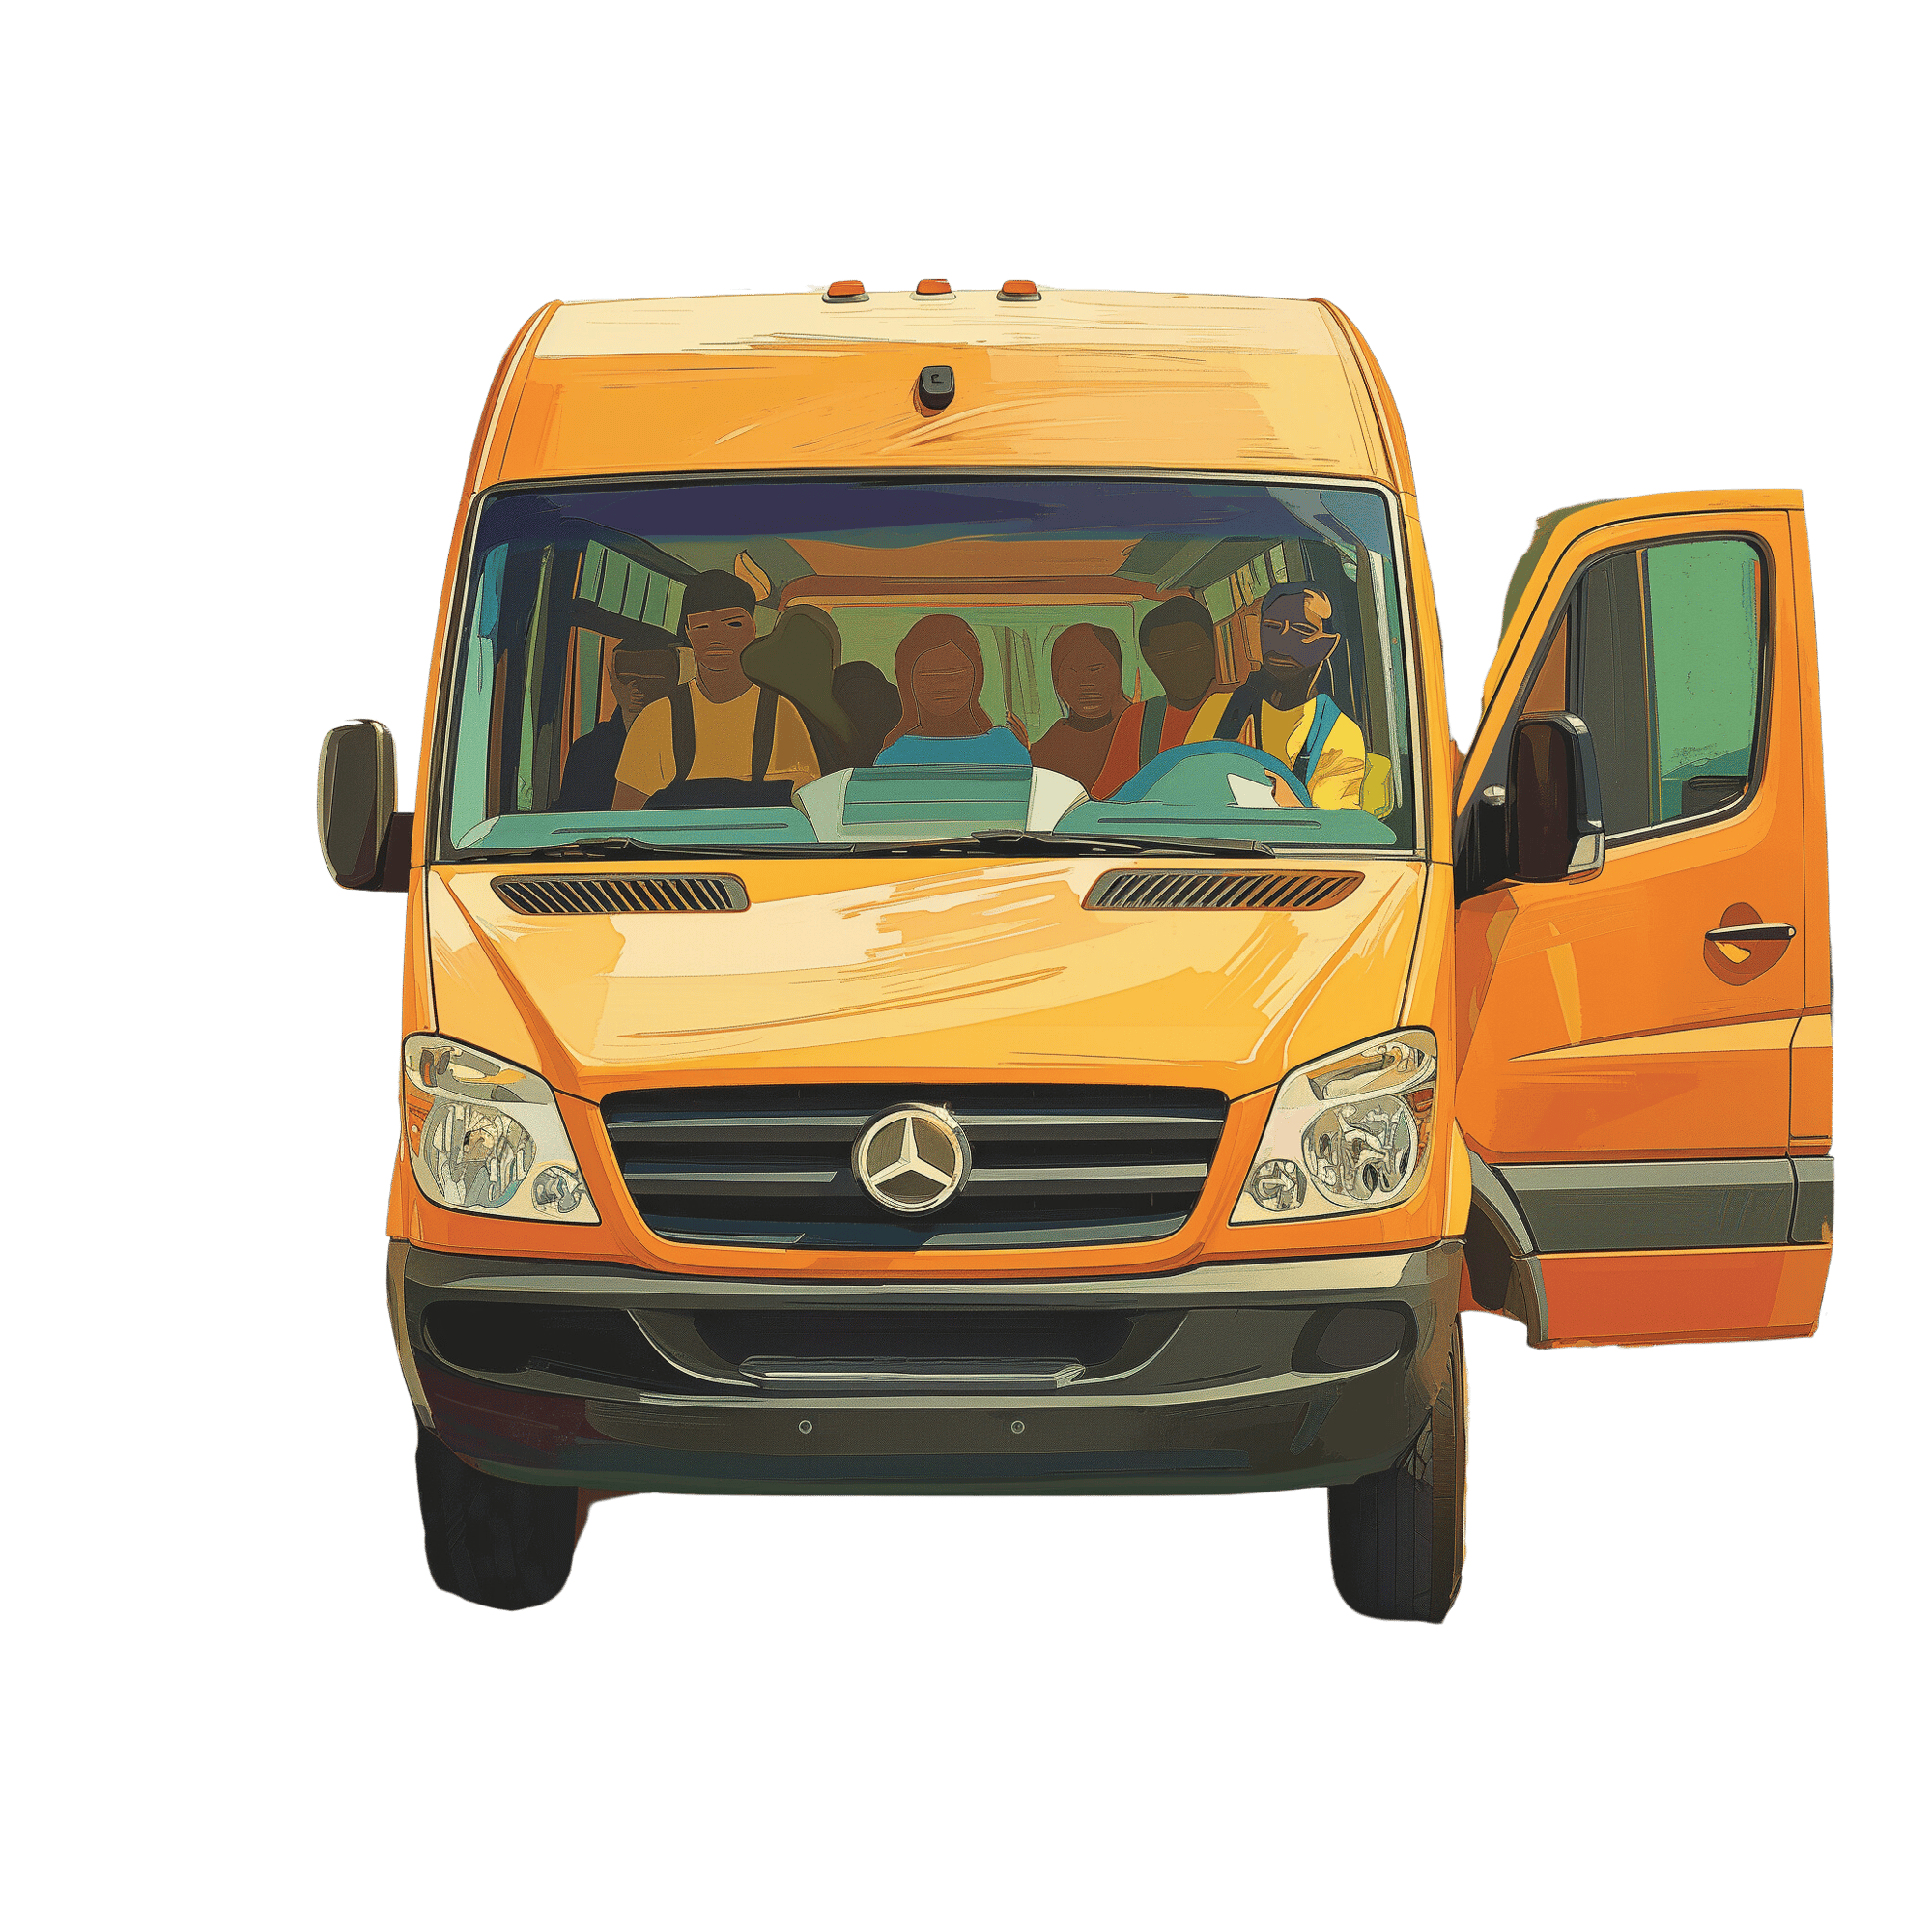 arothkegel_modern_school_van_front_view_with_kids_inside_and_ar_81a4d09f-6597-4929-87f2-f0db6a7d484c - Edited